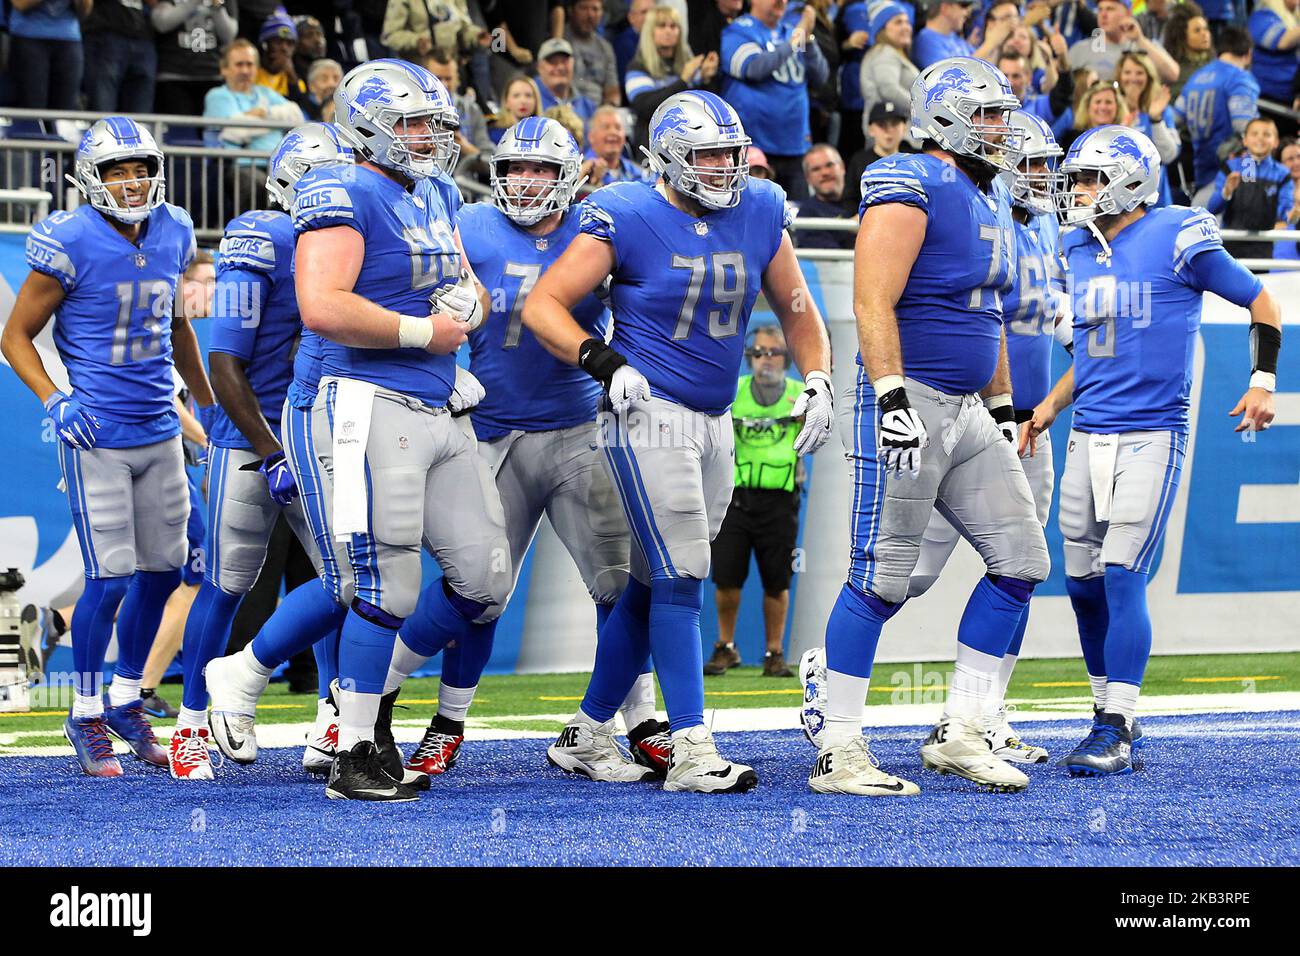 Detroit Lions center Graham Glasgow (60), Detroit Lions offensive tackle Rick Wagner (71), Detroit Lions quarterback Matthew Stafford (9), Detroit Lions offensive guard Frank Ragnow (77), Detroit Lions wide receiver T.J. Jones (13), Detroit Lions offensive guard Tyrell Crosby (65), Detroit Lions running back LeGarrette Blount (29), and Detroit Lions offensive guard Kenny Wiggins (79) celebrate a touchdown during the second half of an NFL football game against the Los Angeles Rams in Detroit, Michigan USA, on Sunday, December 2, 2018. (Photo by Amy Lemus/NurPhoto) Stock Photo